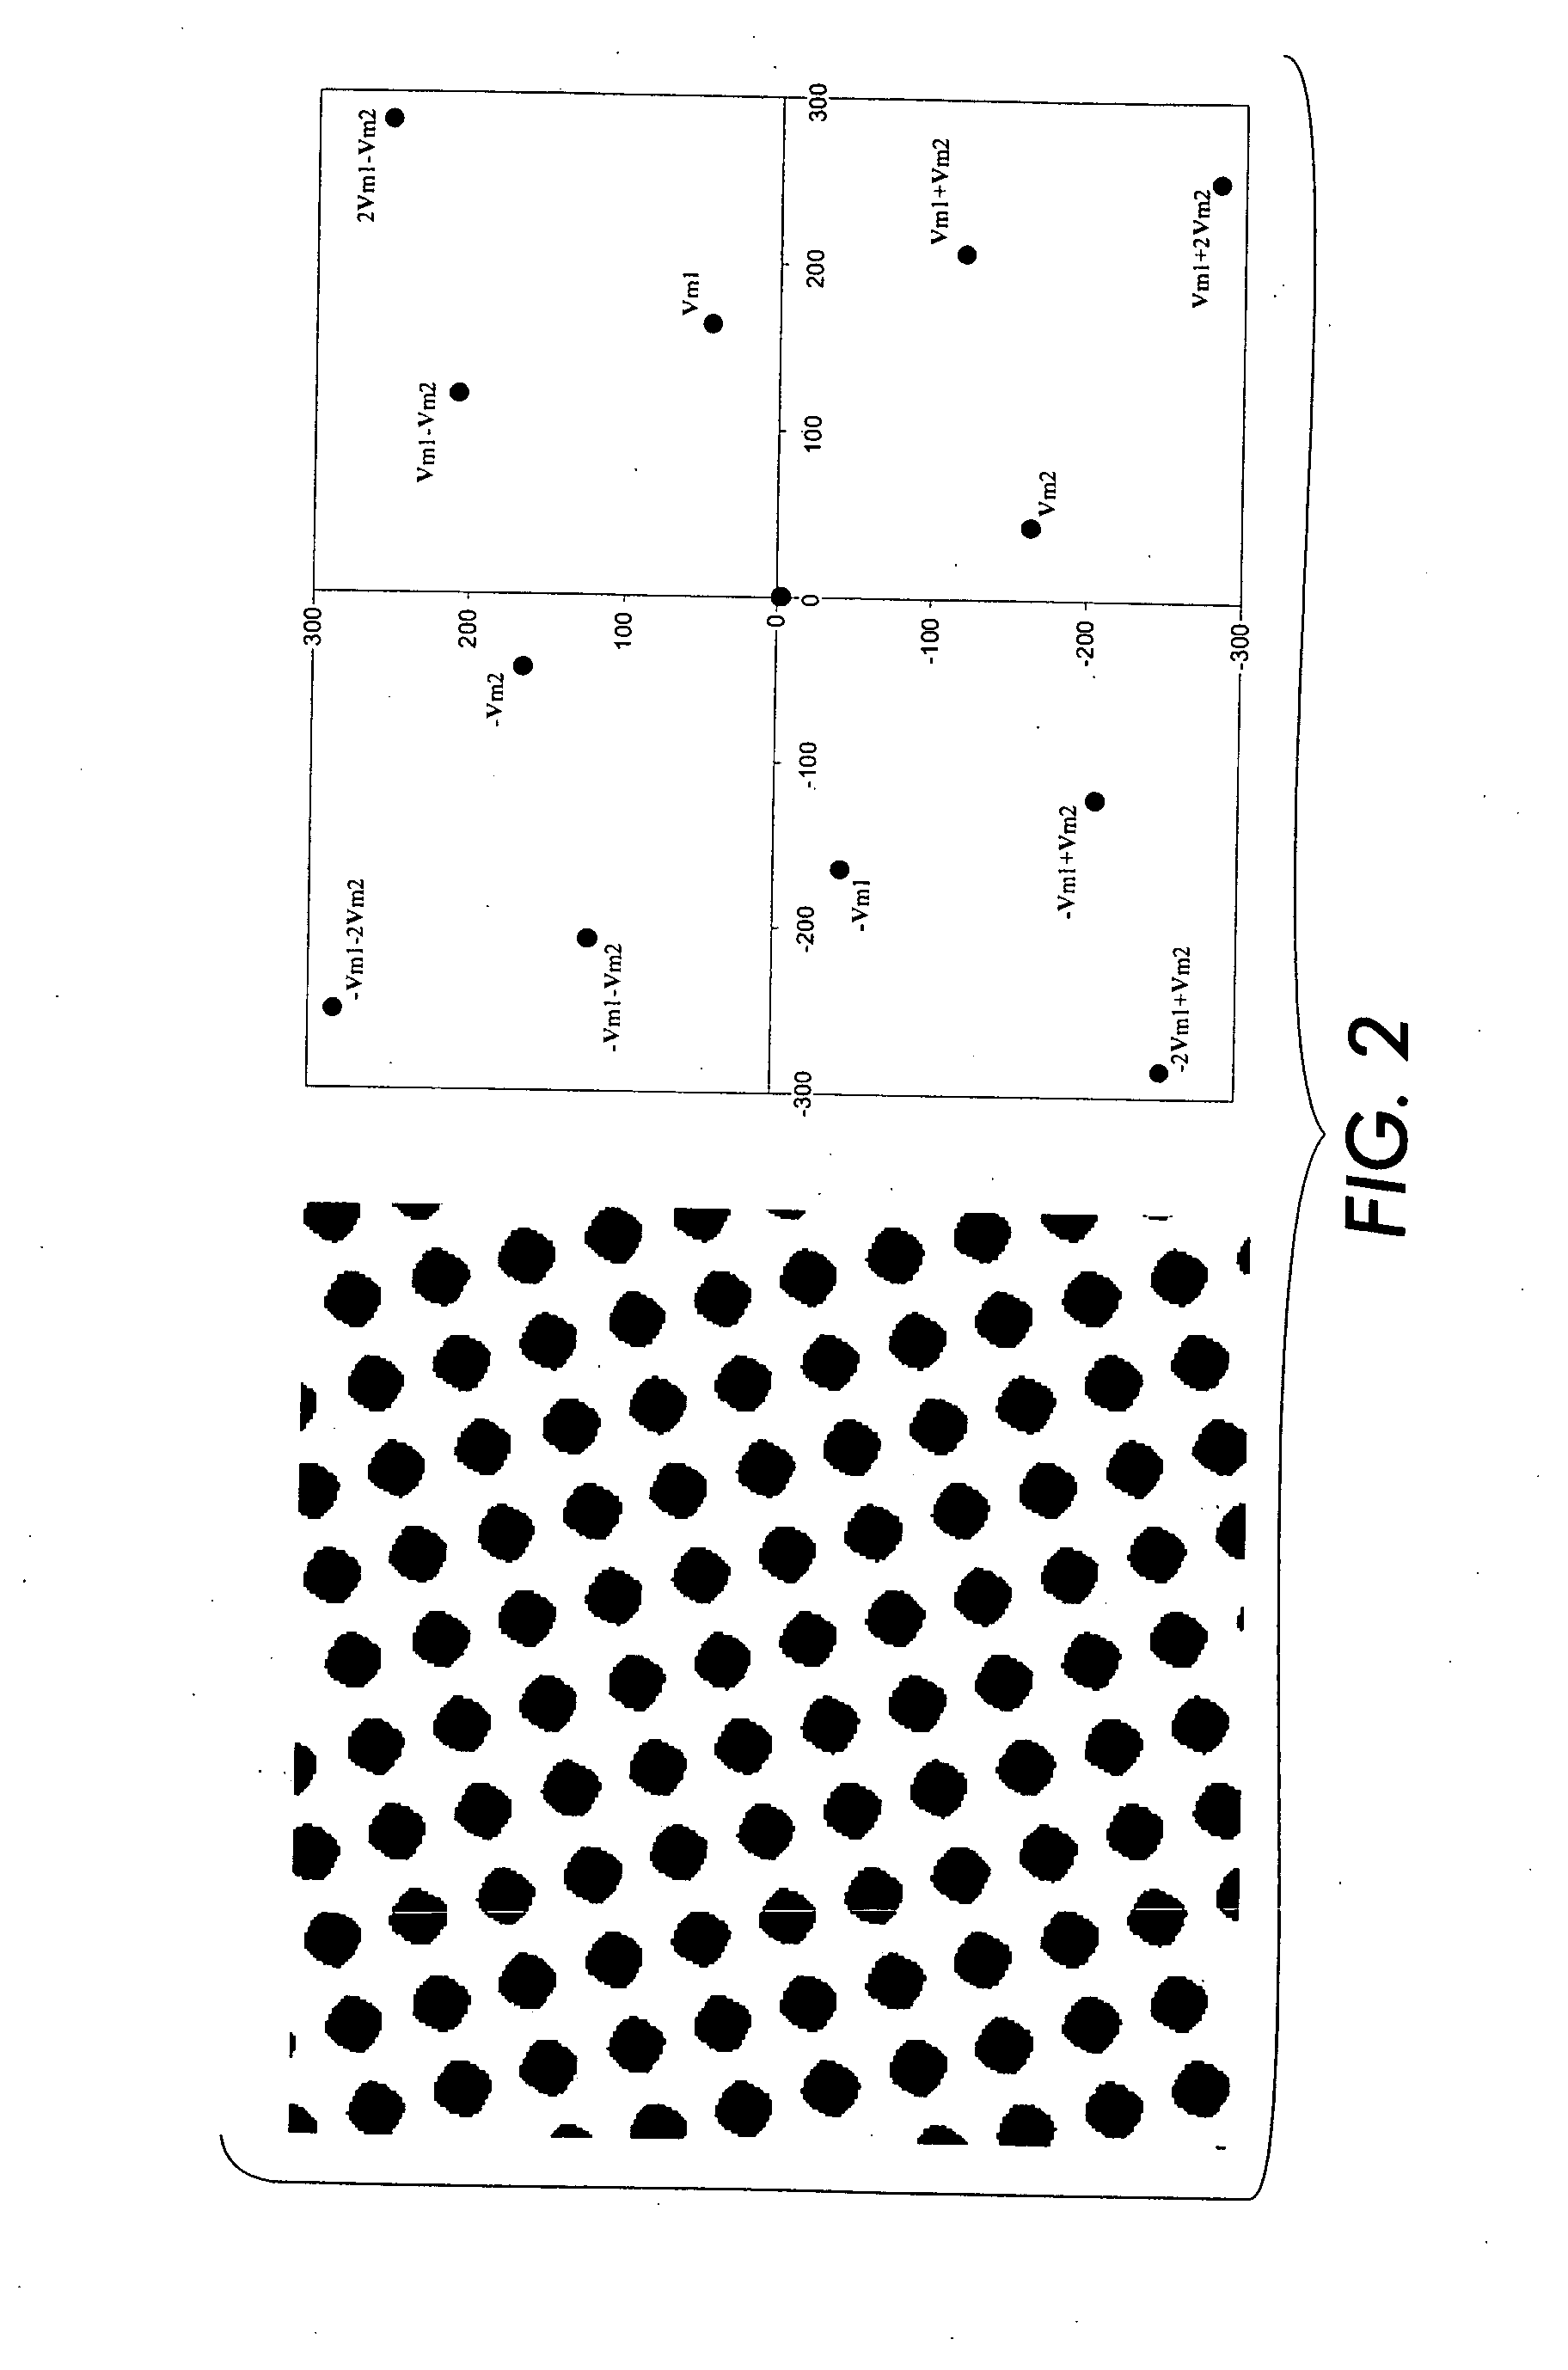 Moire-free color halftone configuration employing common frequency vectors